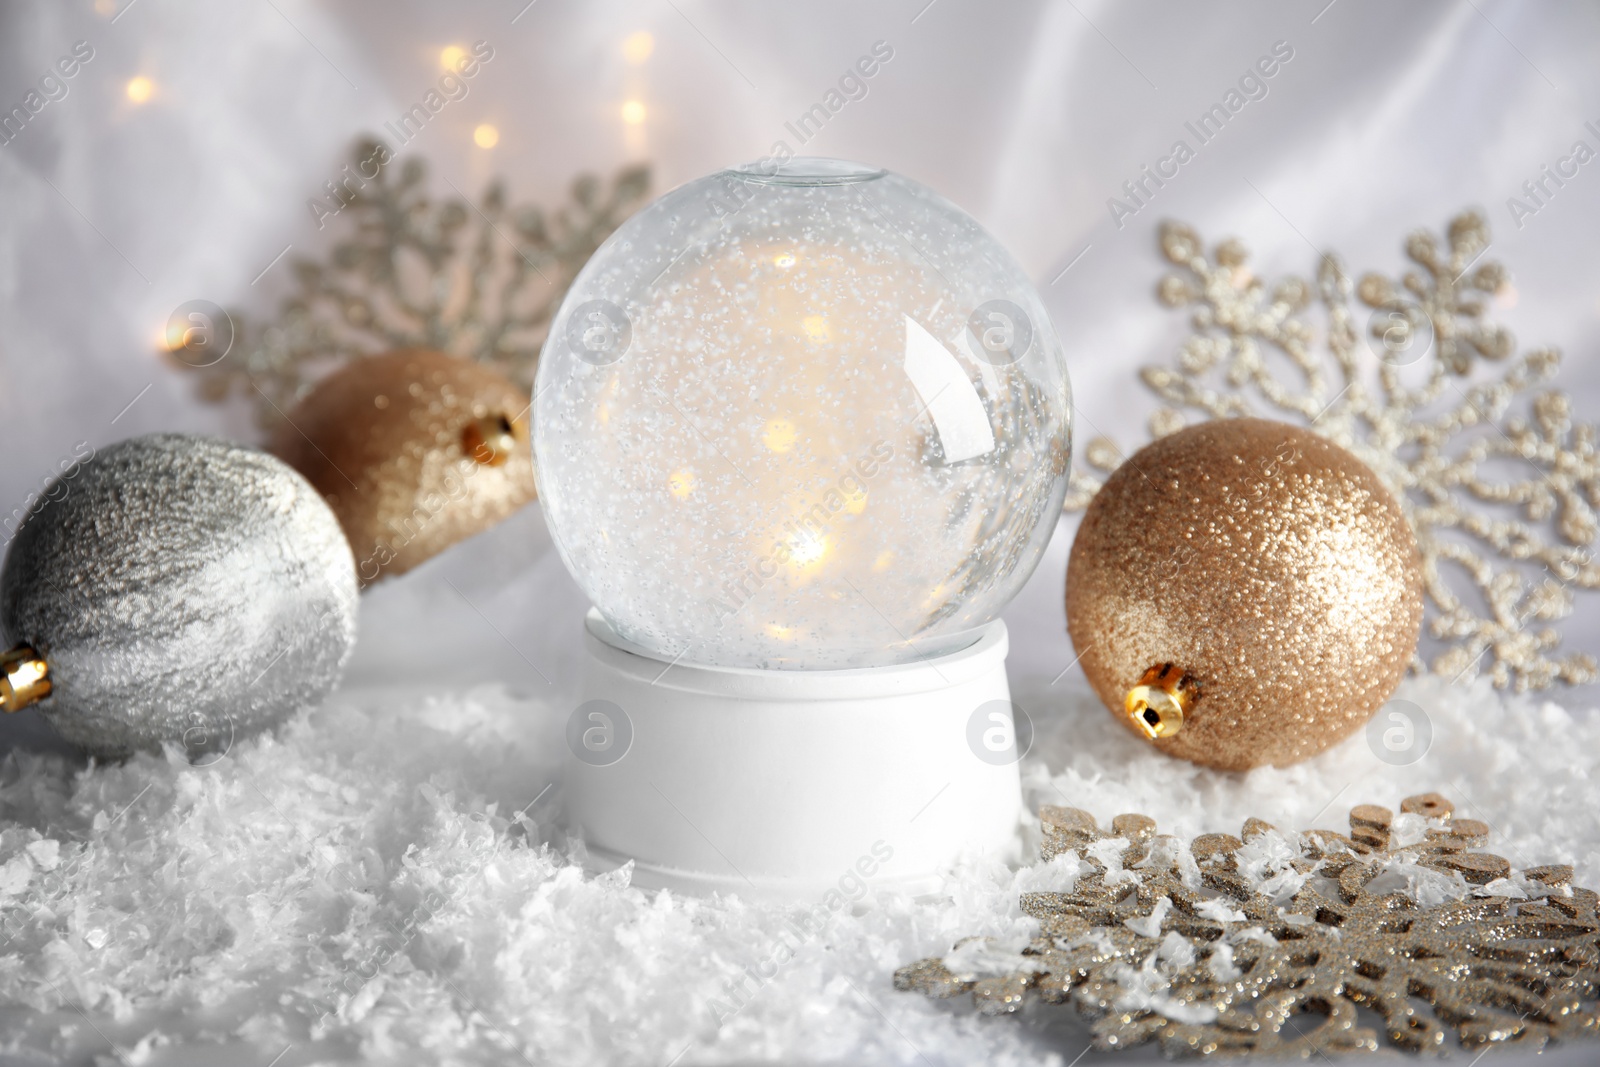 Photo of Magical empty snow globe with Christmas decorations on white fabric